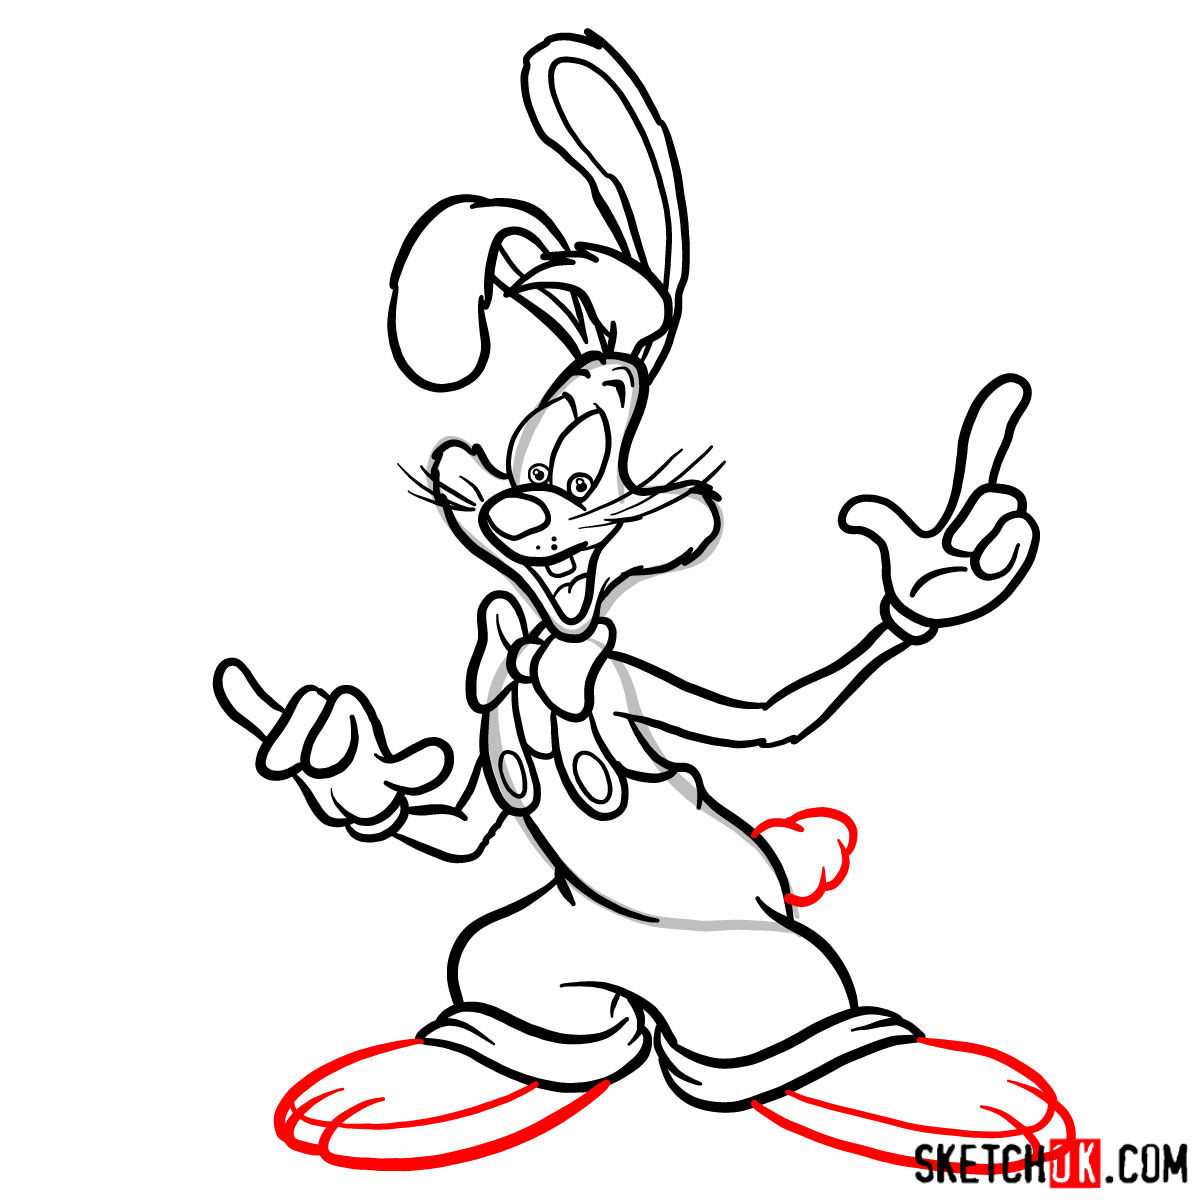 How to draw Roger Rabbit - step 13